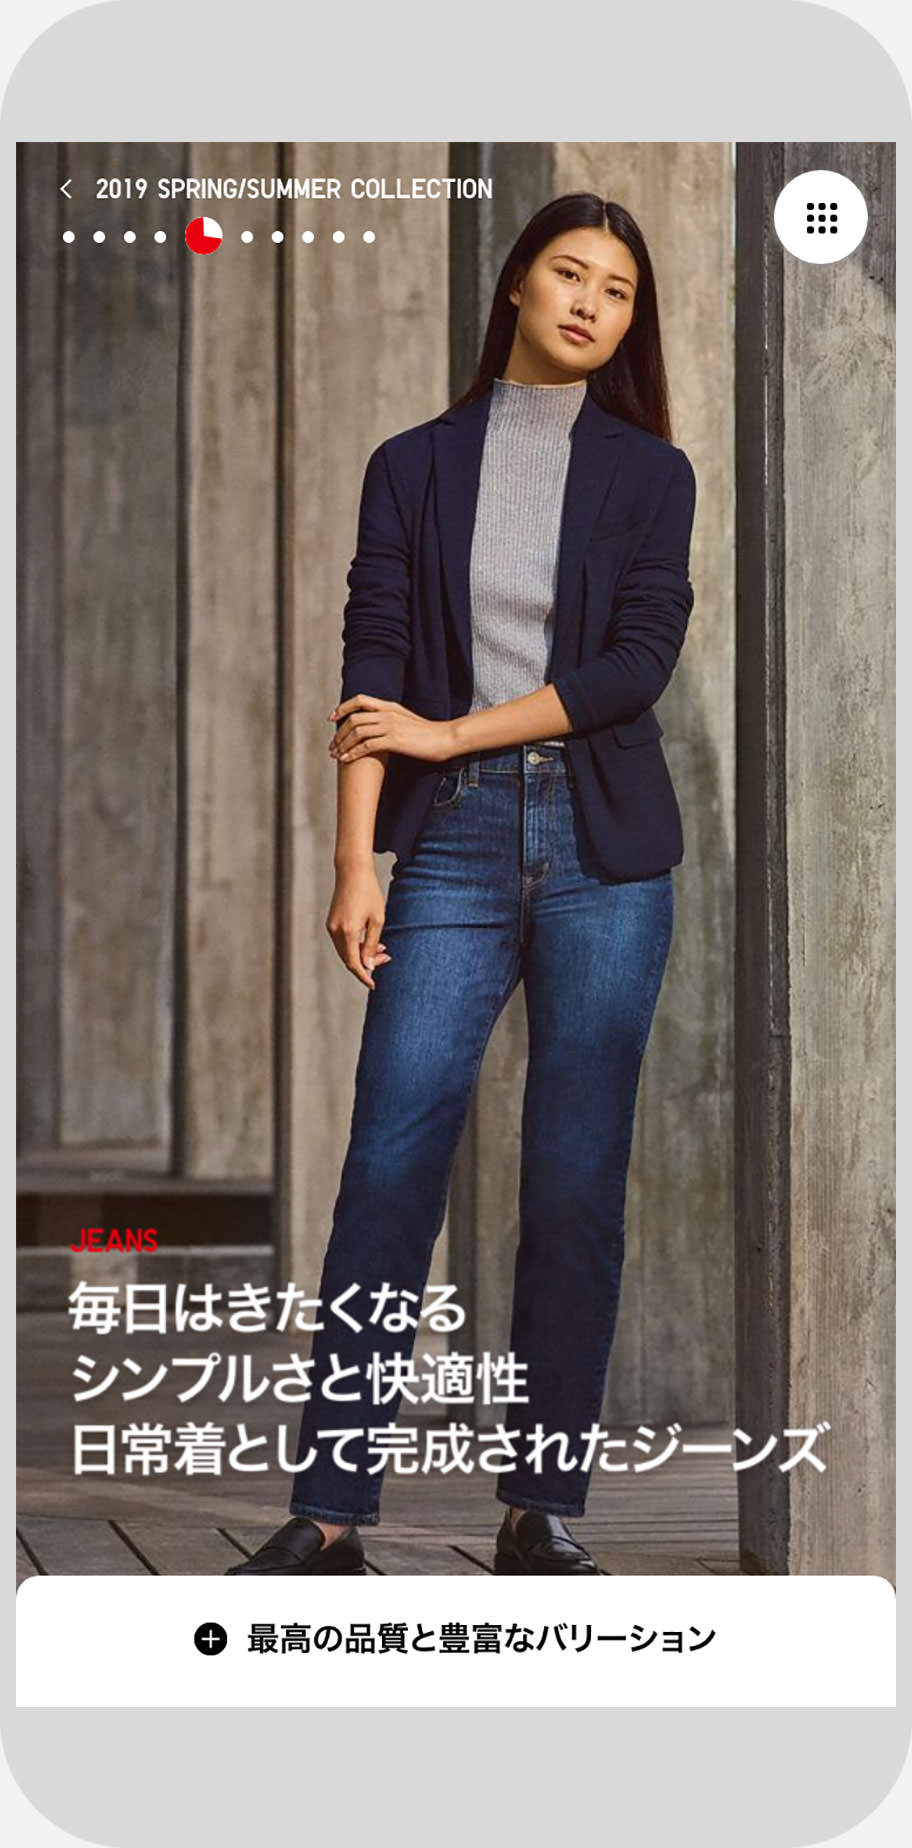 UNIQLO 2019 SPRING/SUMMER Collection